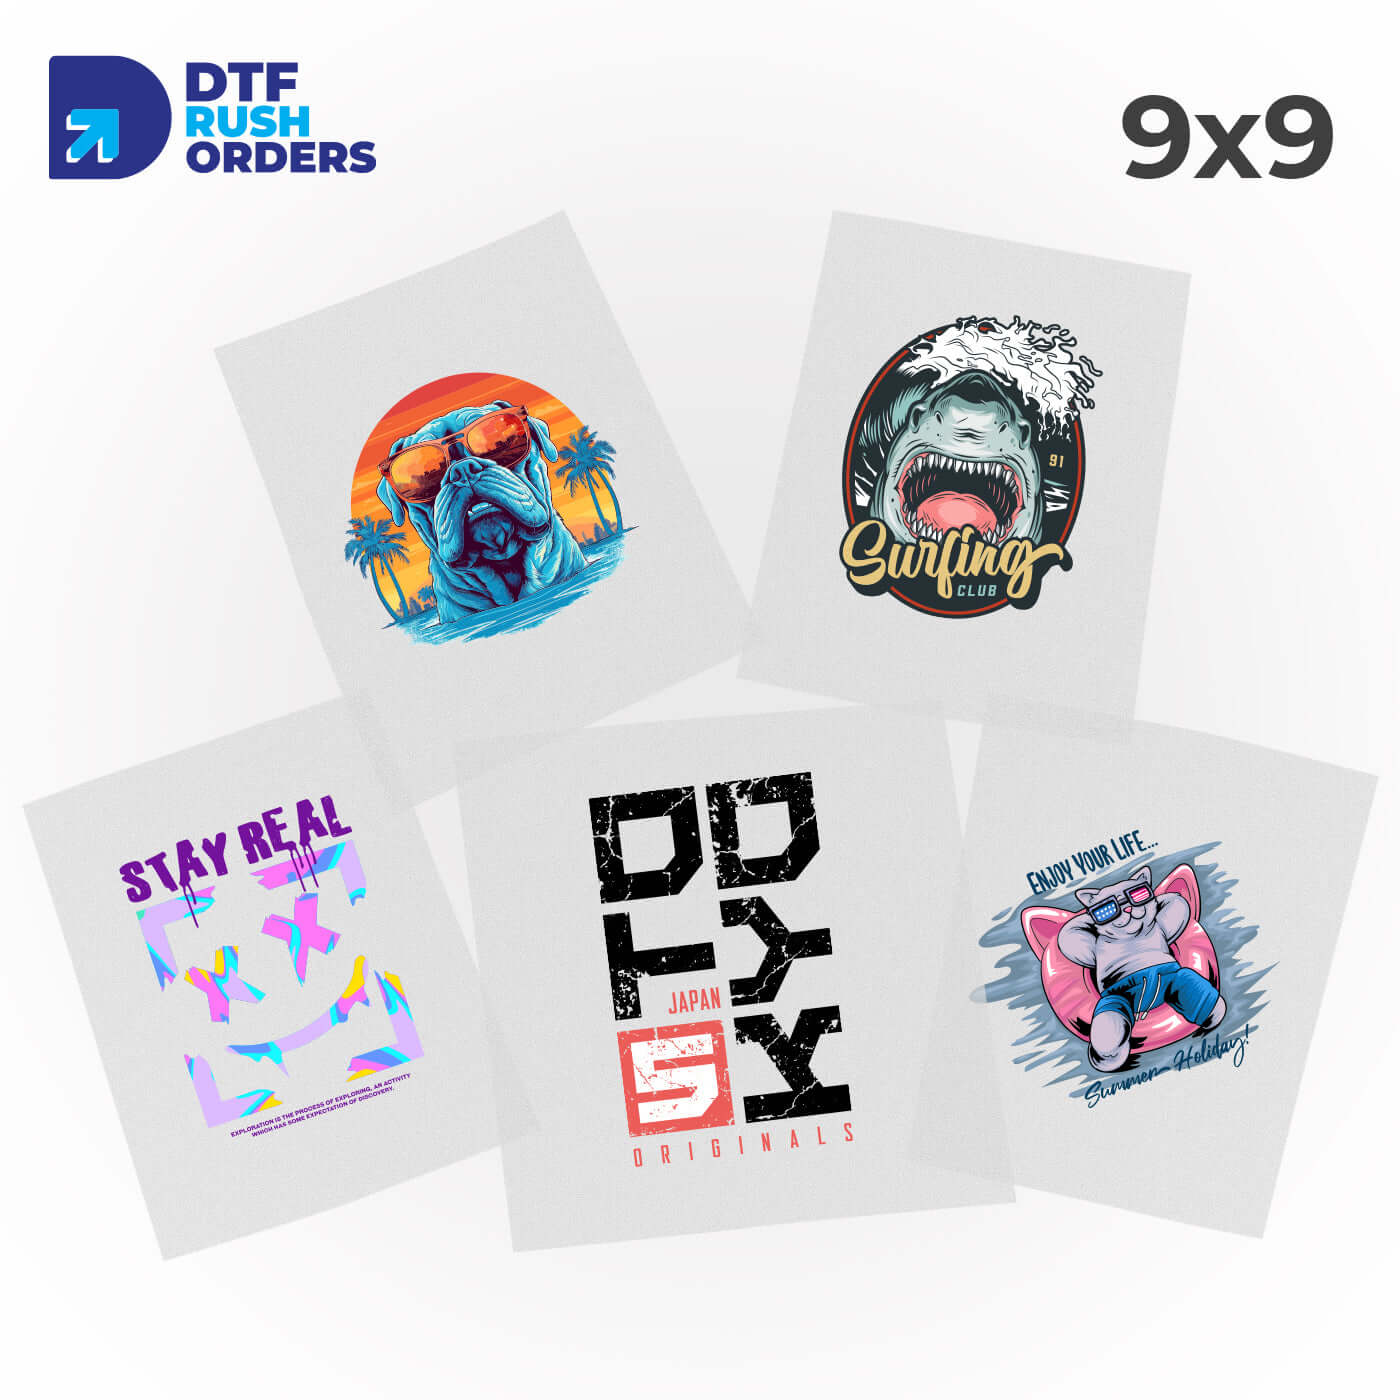 Canva design turned into high-quality 9x9 DTF Transfer